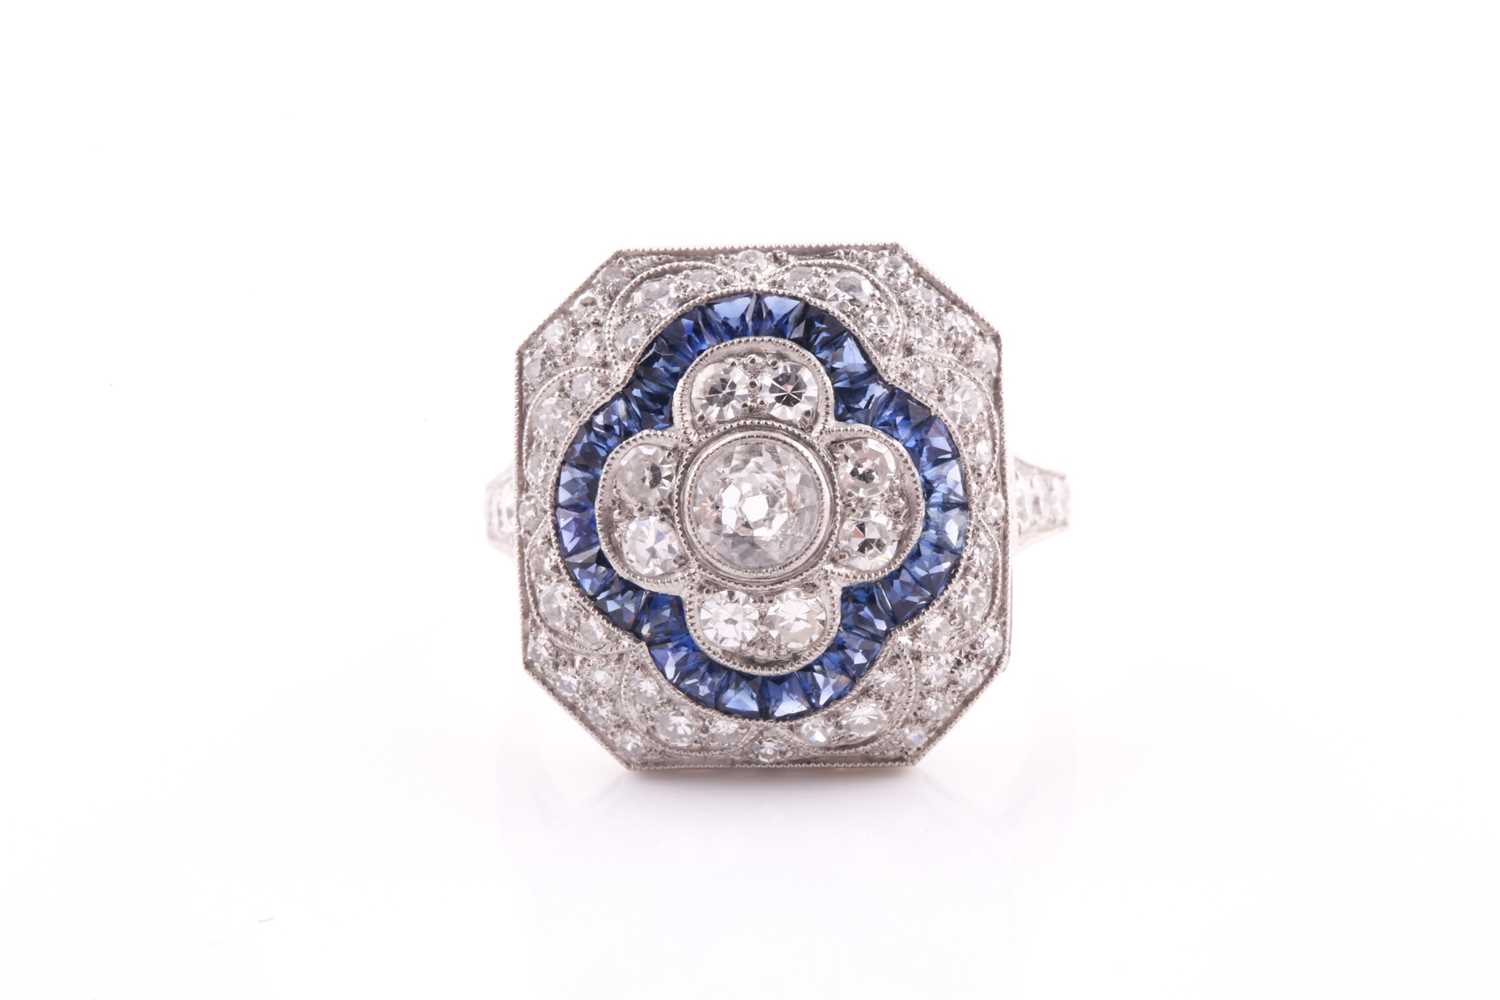 A platinum, diamond, and sapphire cocktail ring, set with a central quatrefoil floral design, within